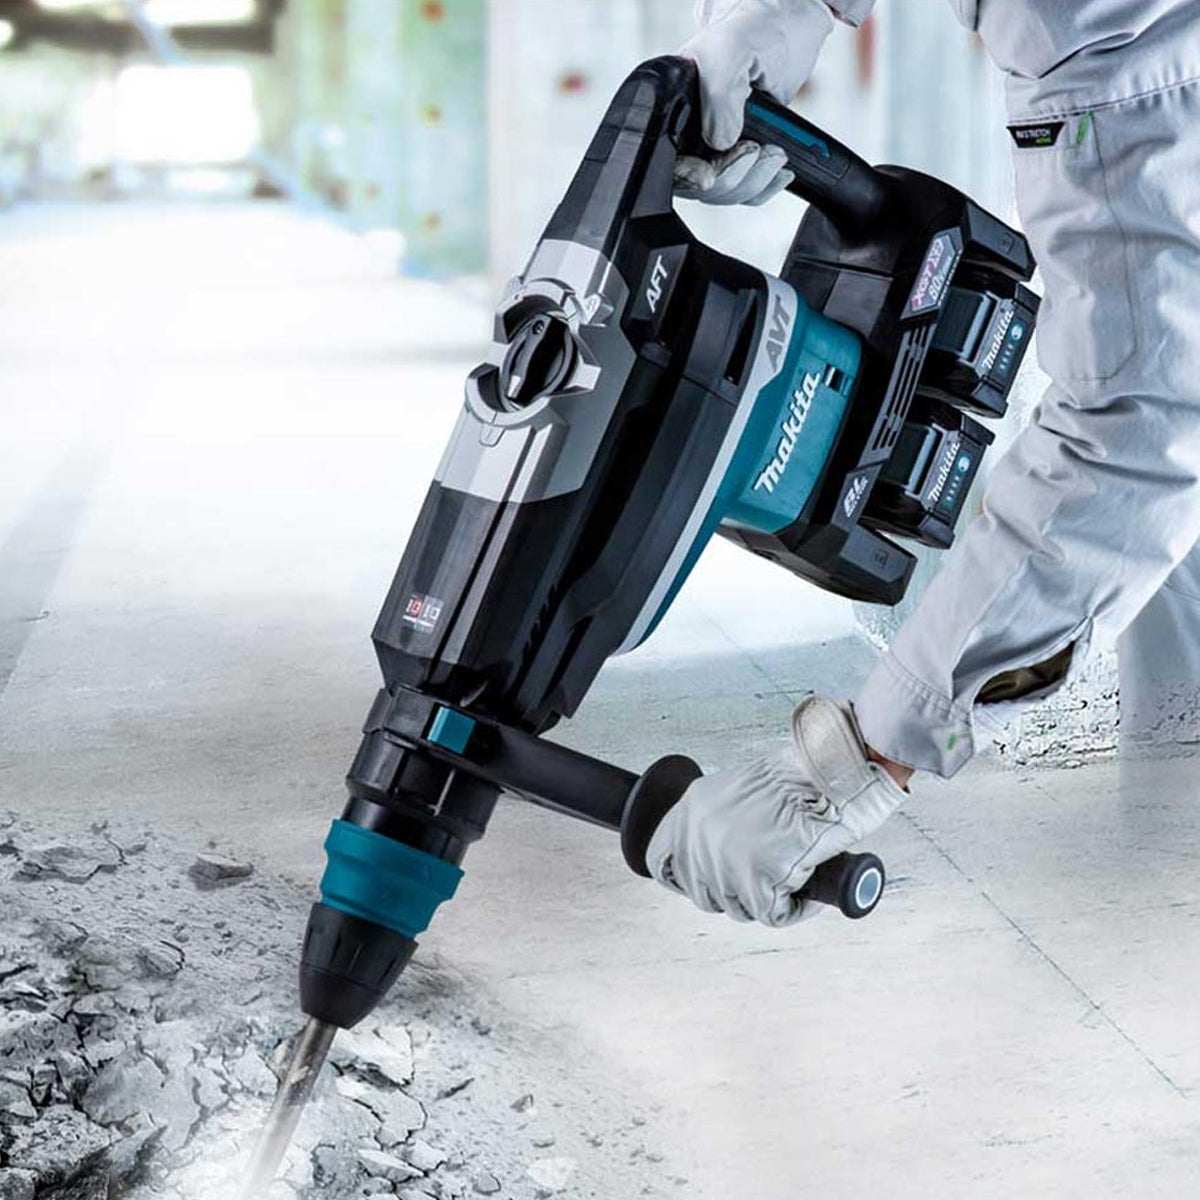 Makita HR006GD203 80V/40V XGT Brushless Demolition Hammer Drill With 2 x 2.5Ah Battery, Charger & Case